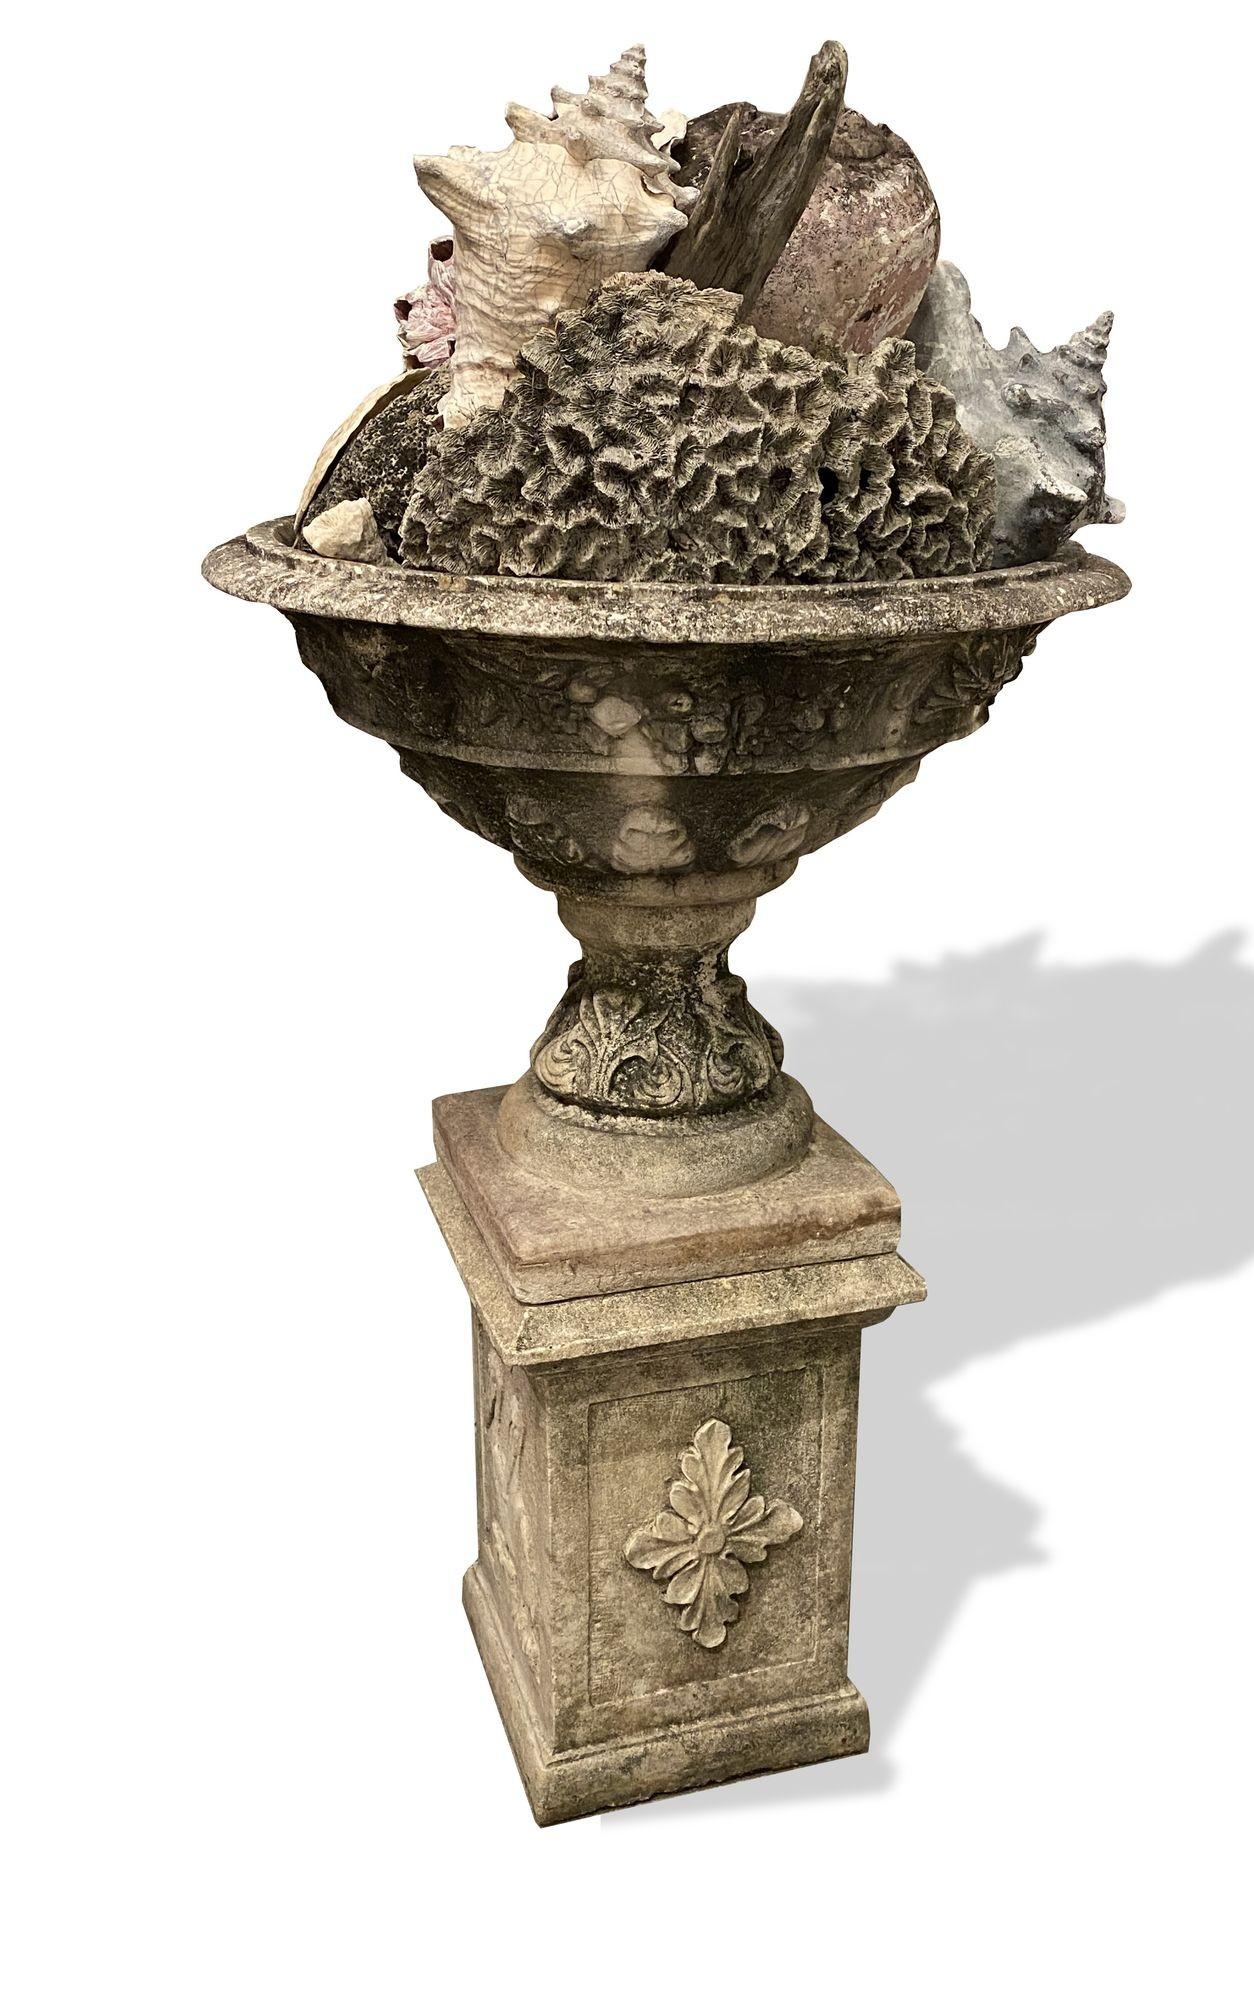 Pair French stone urns on pedestals. The Urns late 19th century. The pedestals early 20th century. Filled with shells, corals, and sea objects.